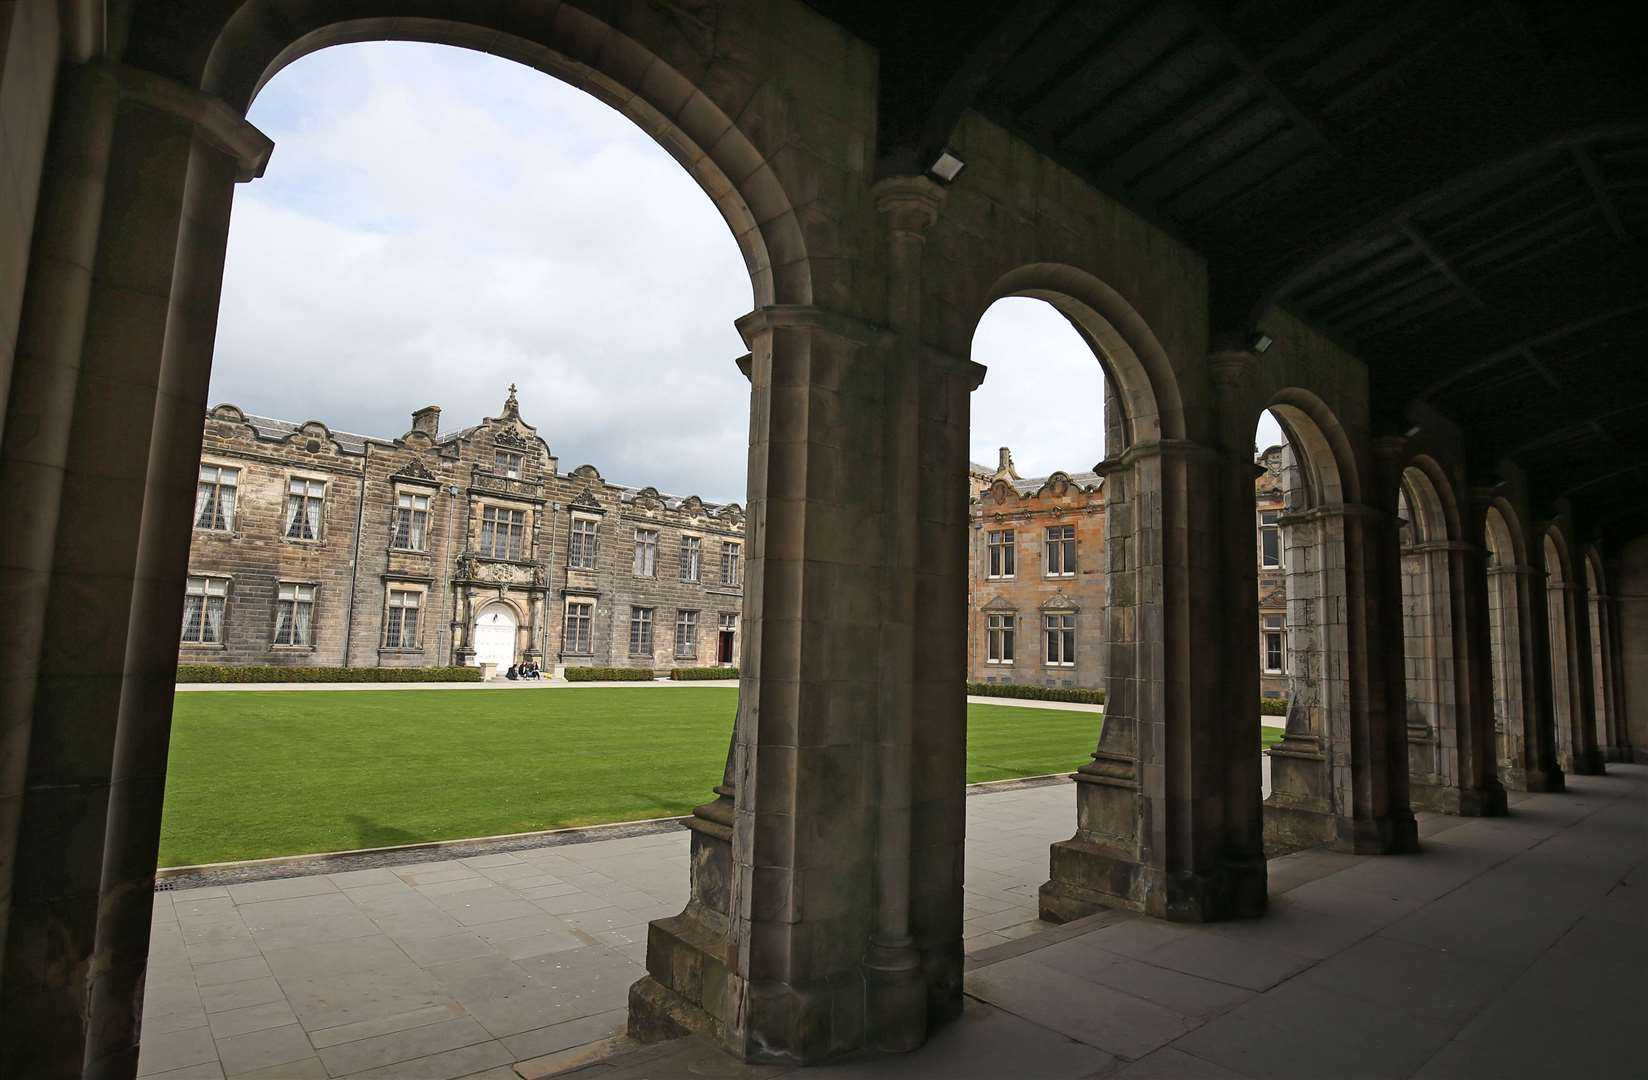 The Lower and Upper College Halls at the University of St Andrews, Scotland (Jane Barlow/PA)